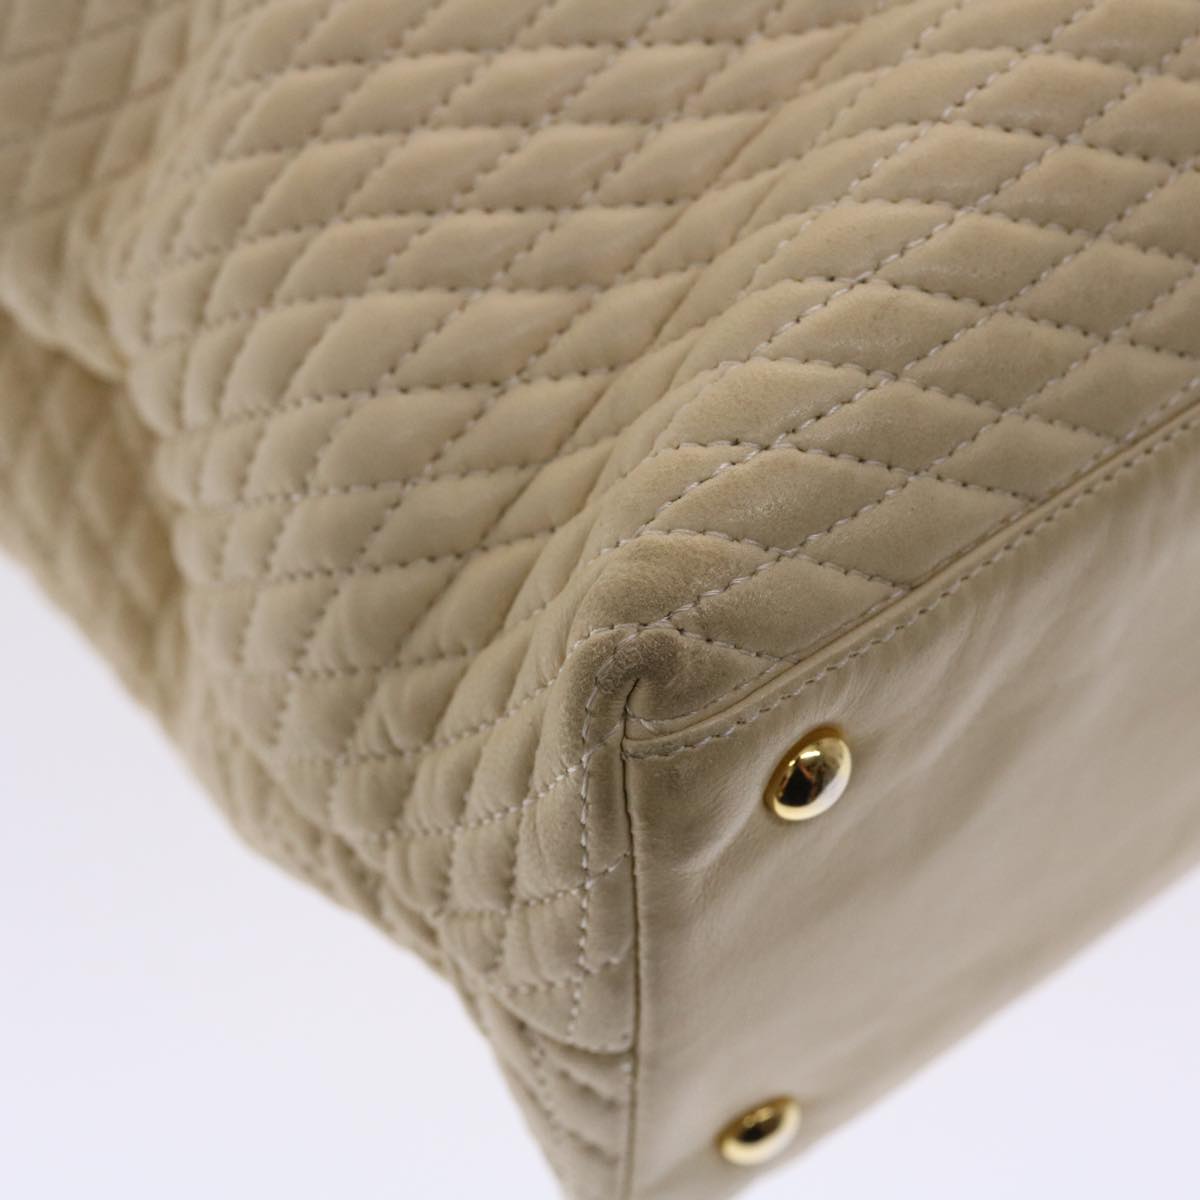 BALLY Quilted Shoulder Bag Leather Beige Auth yb275